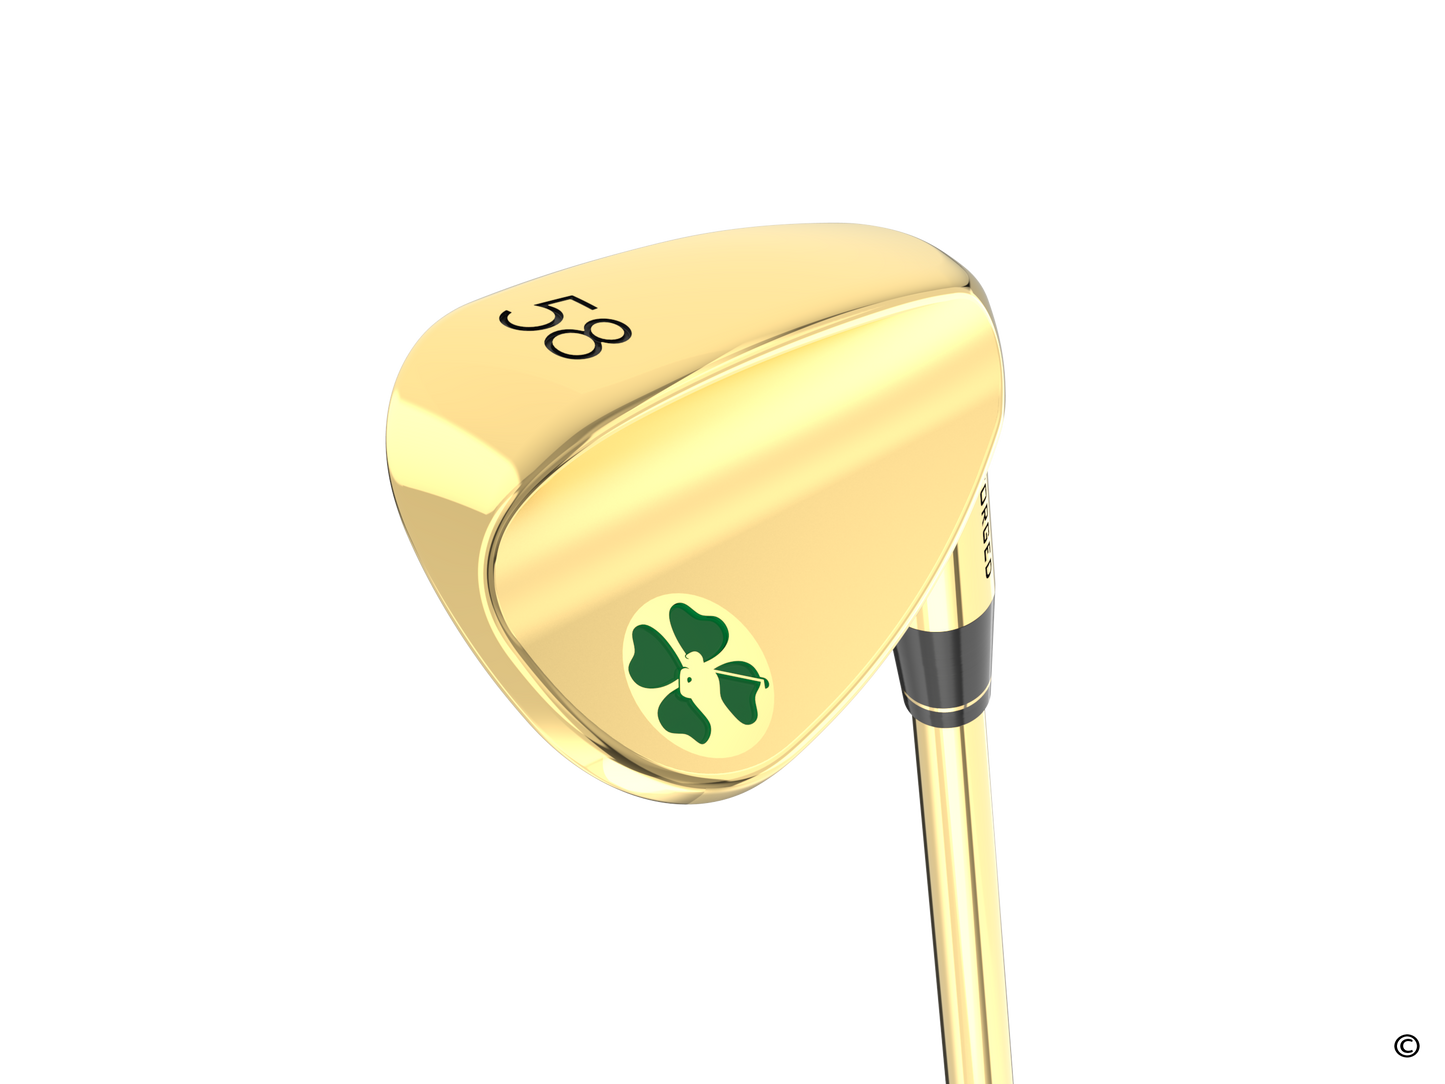 Signature Gold 58 Degree Flop Wedge